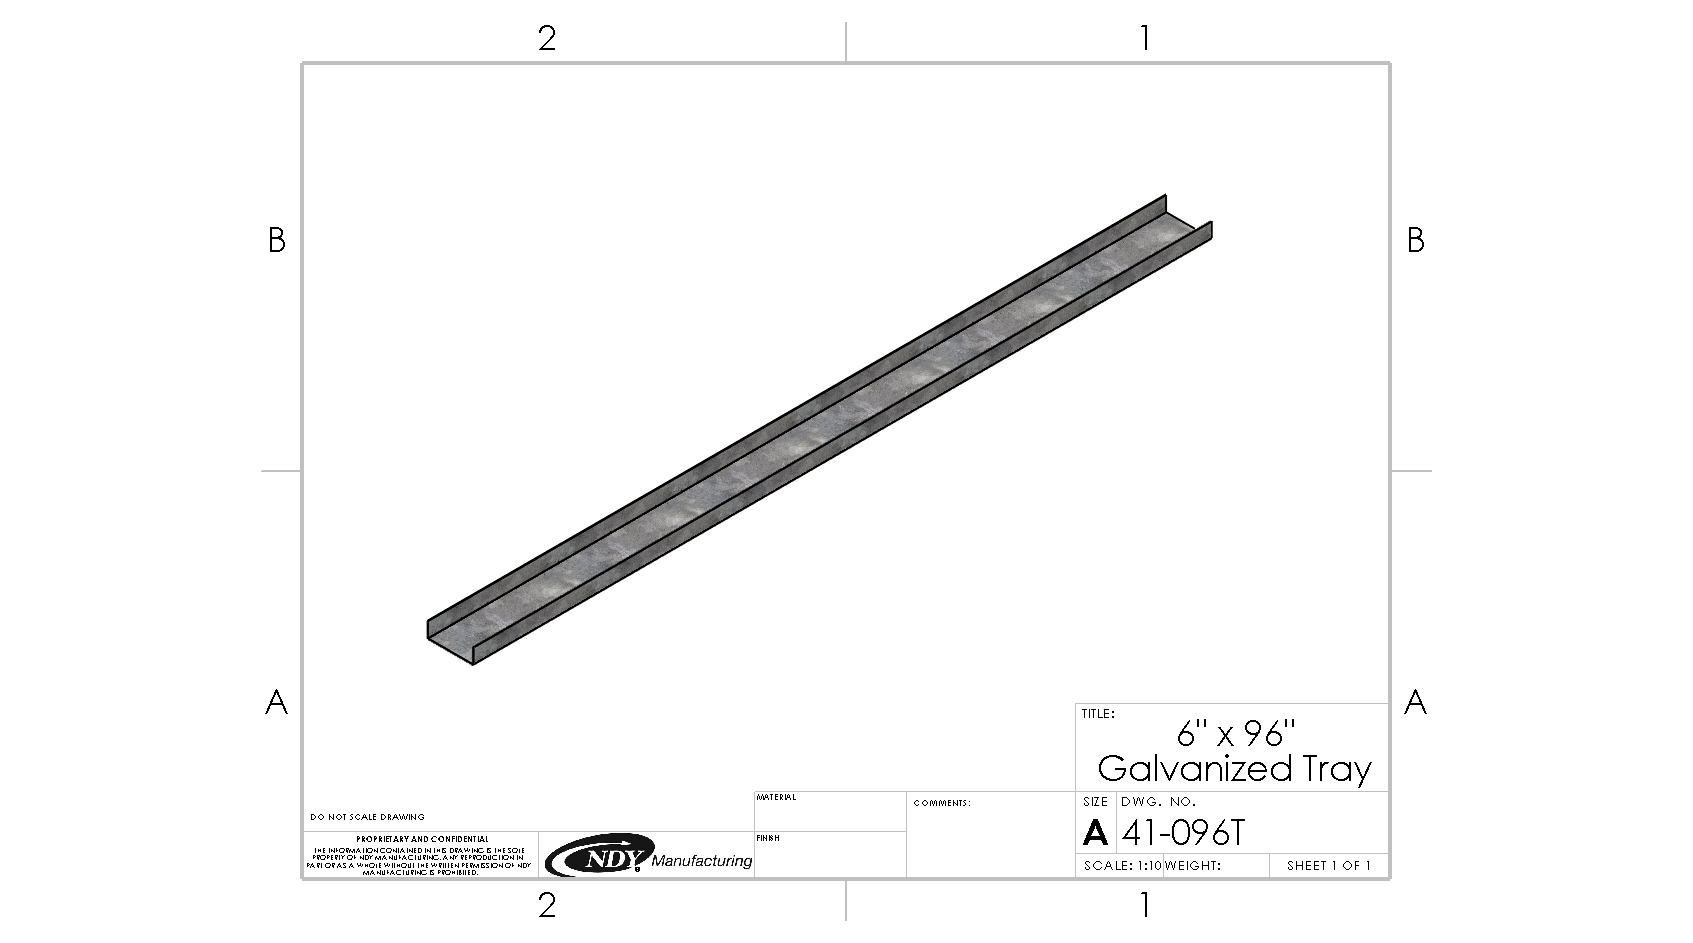 A drawing of a Galvanized Tray - 6"W x 96"L.